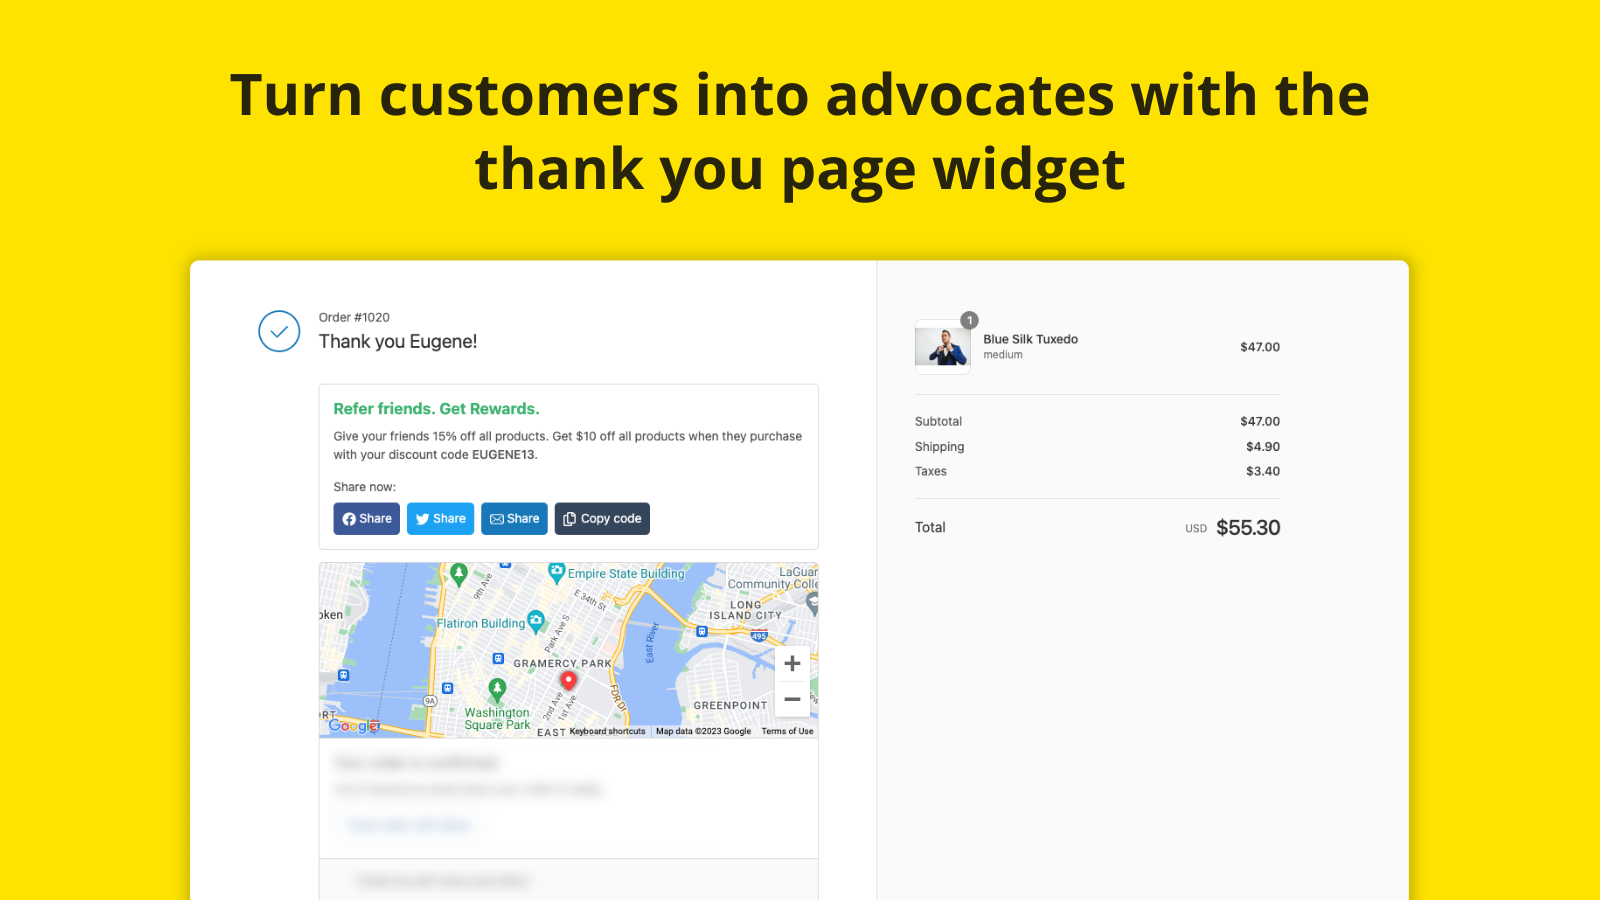 Turn customers into advocates with the thank you page widget